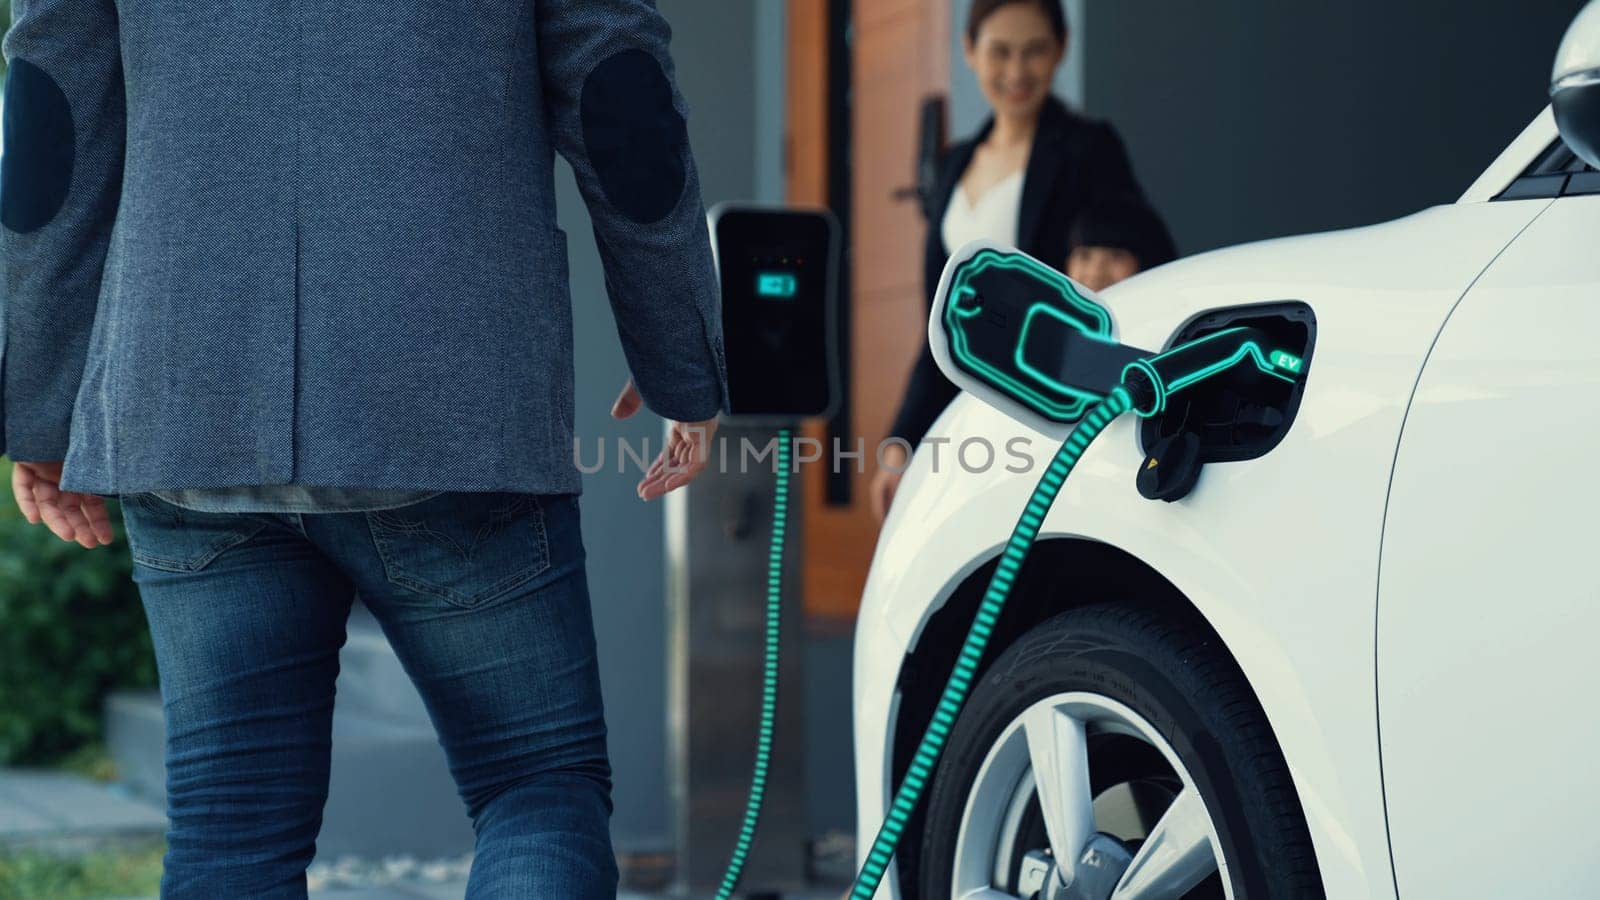 Modern family couple recharge electric car, EV charger from home charging station plugged in EV car in house garage. Smart and futuristic home energy infrastructure. Peruse